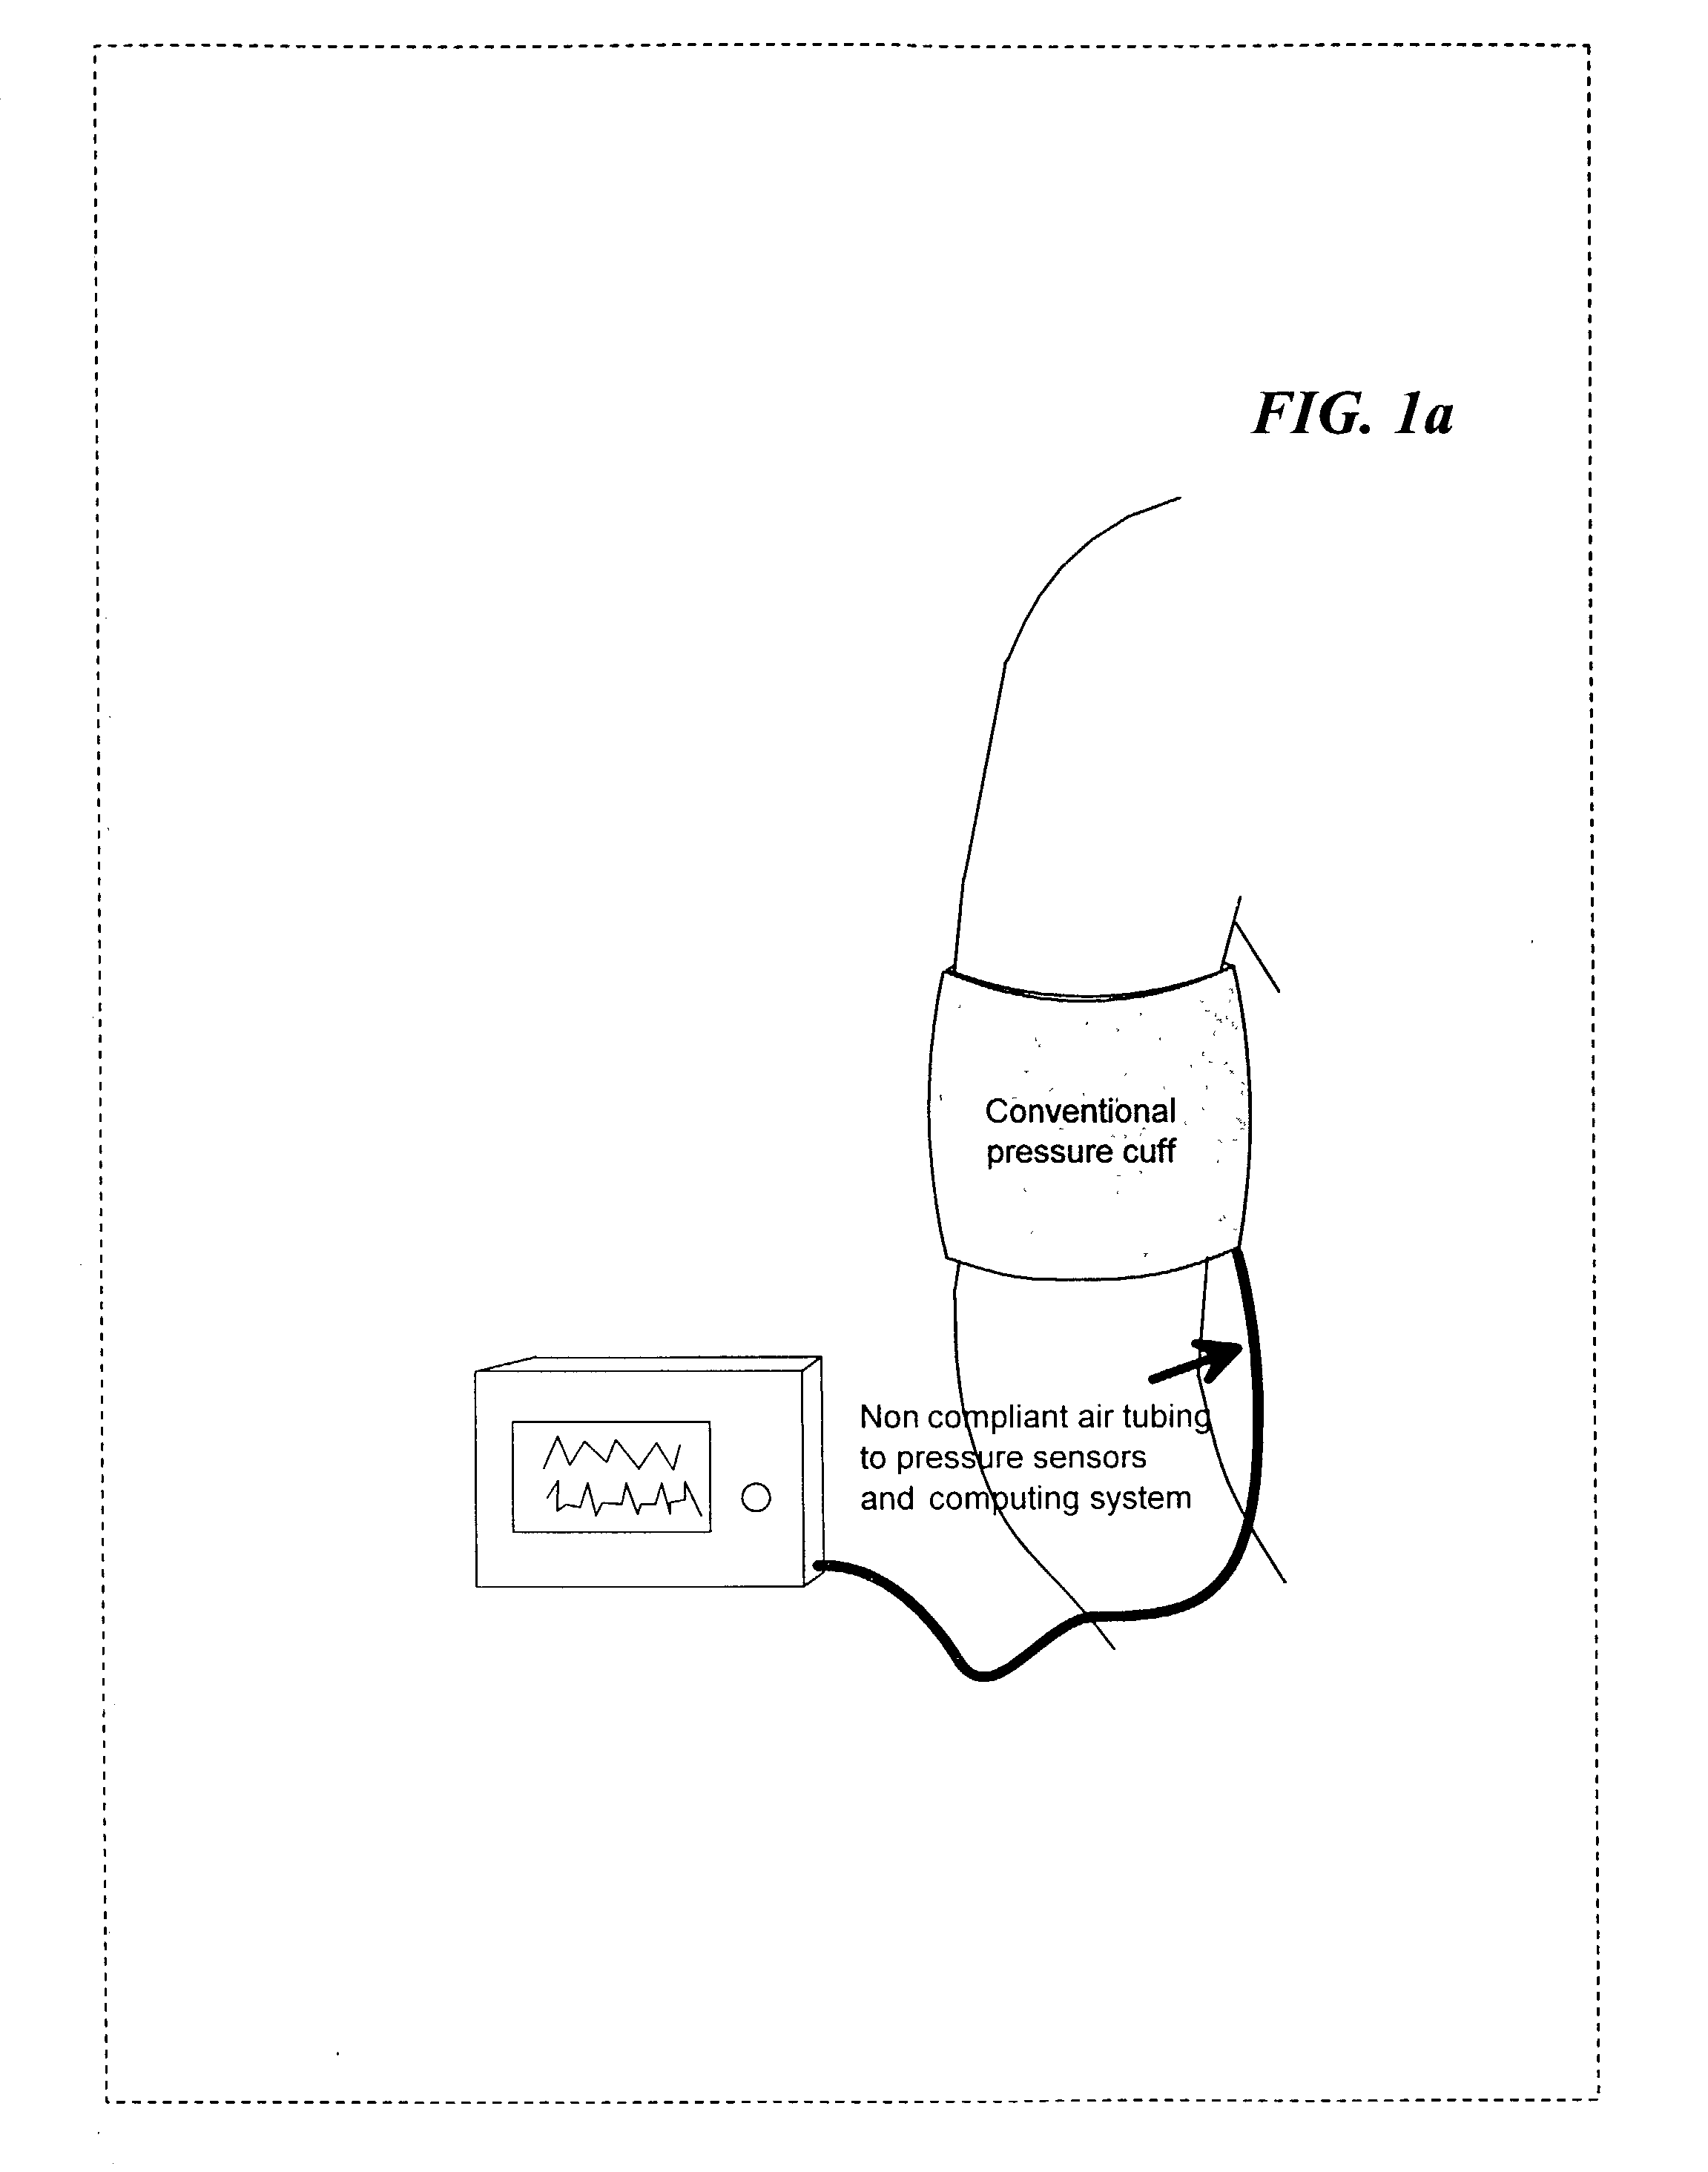 Methods, apparatus and articles-of-manufacture for noninvasive measurement and monitoring of peripheral blood flow, perfusion, cardiac output biophysic stress and cardiovascular condition